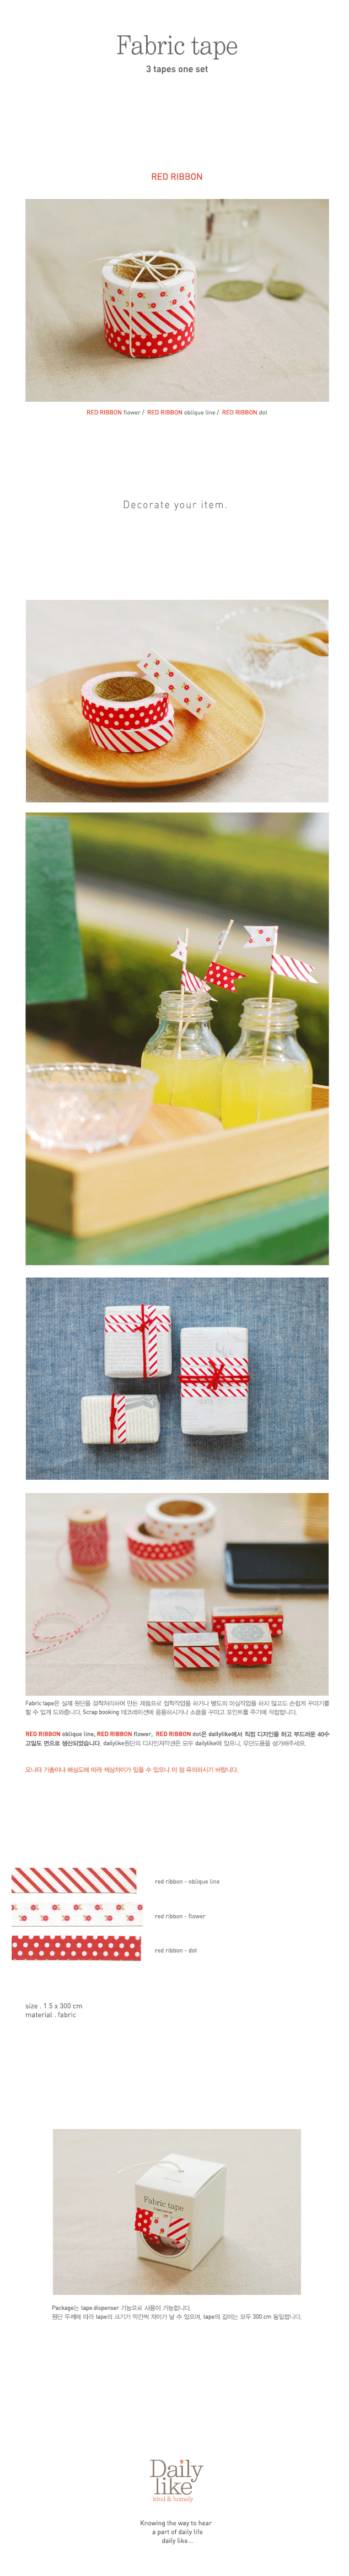 Korean stationer Daily Like's First Love Fabric Tape [korean stationery, daily like tapes, daily like stationery, fabric tapes]